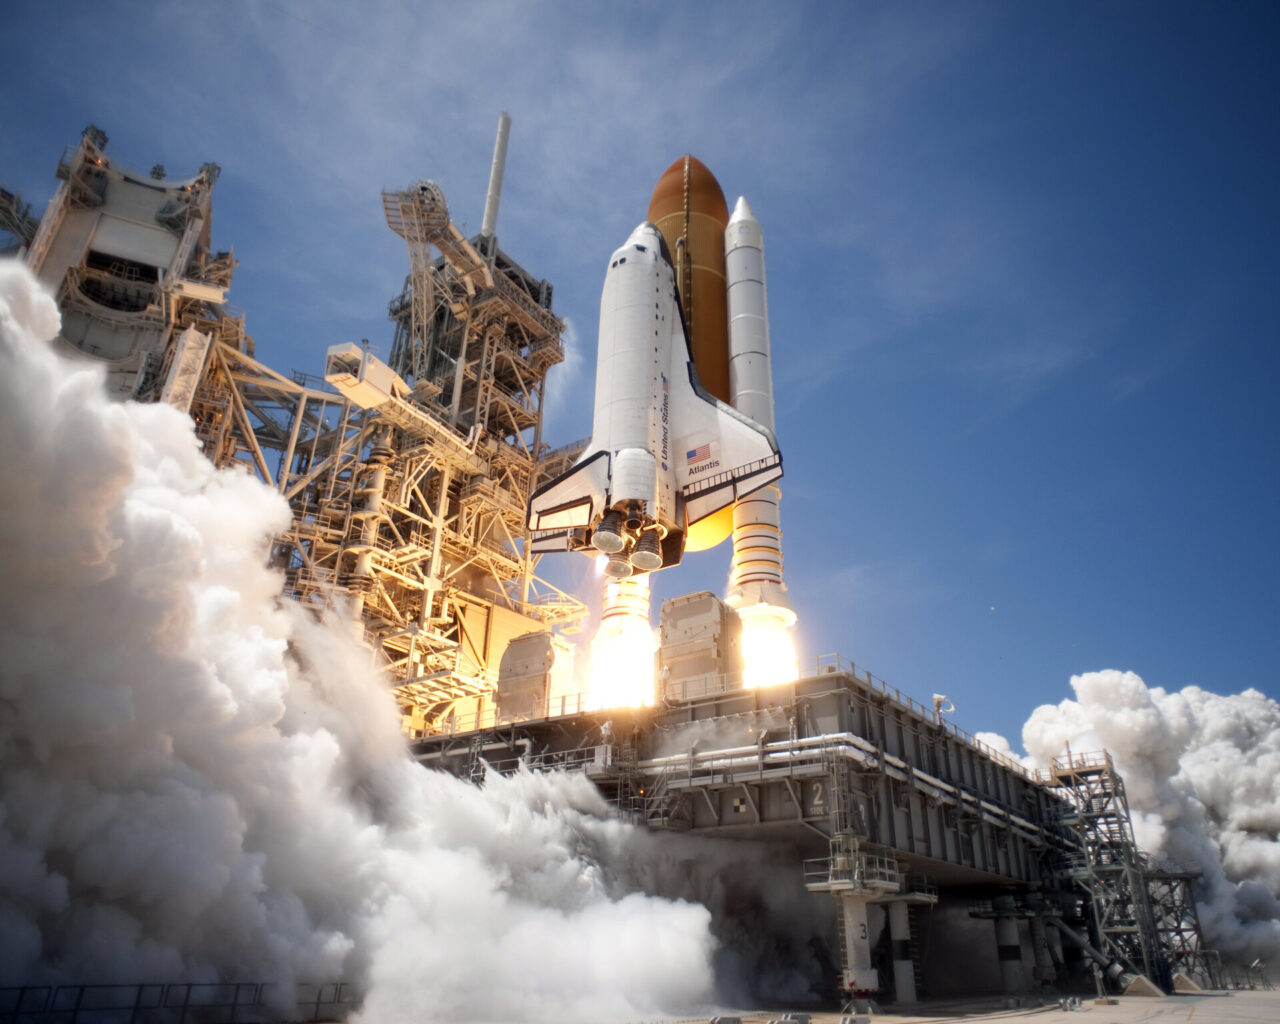 STS 132 launched pillars